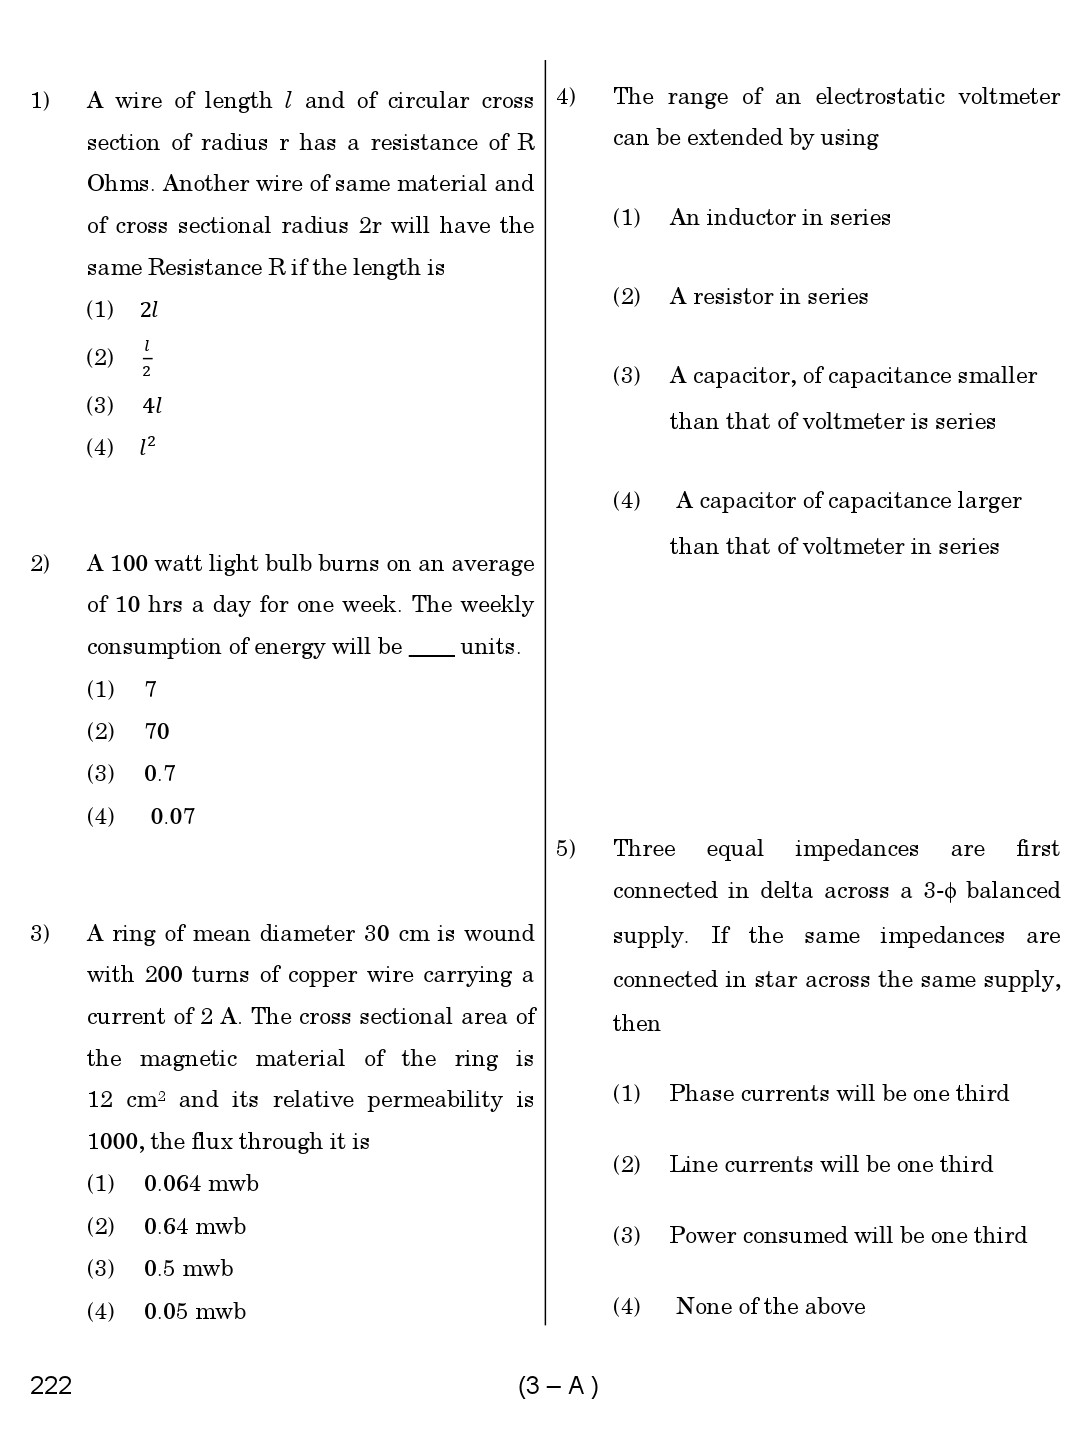 Karnataka PSC Assistant Engineer Electrical Exam Sample Question Paper 3